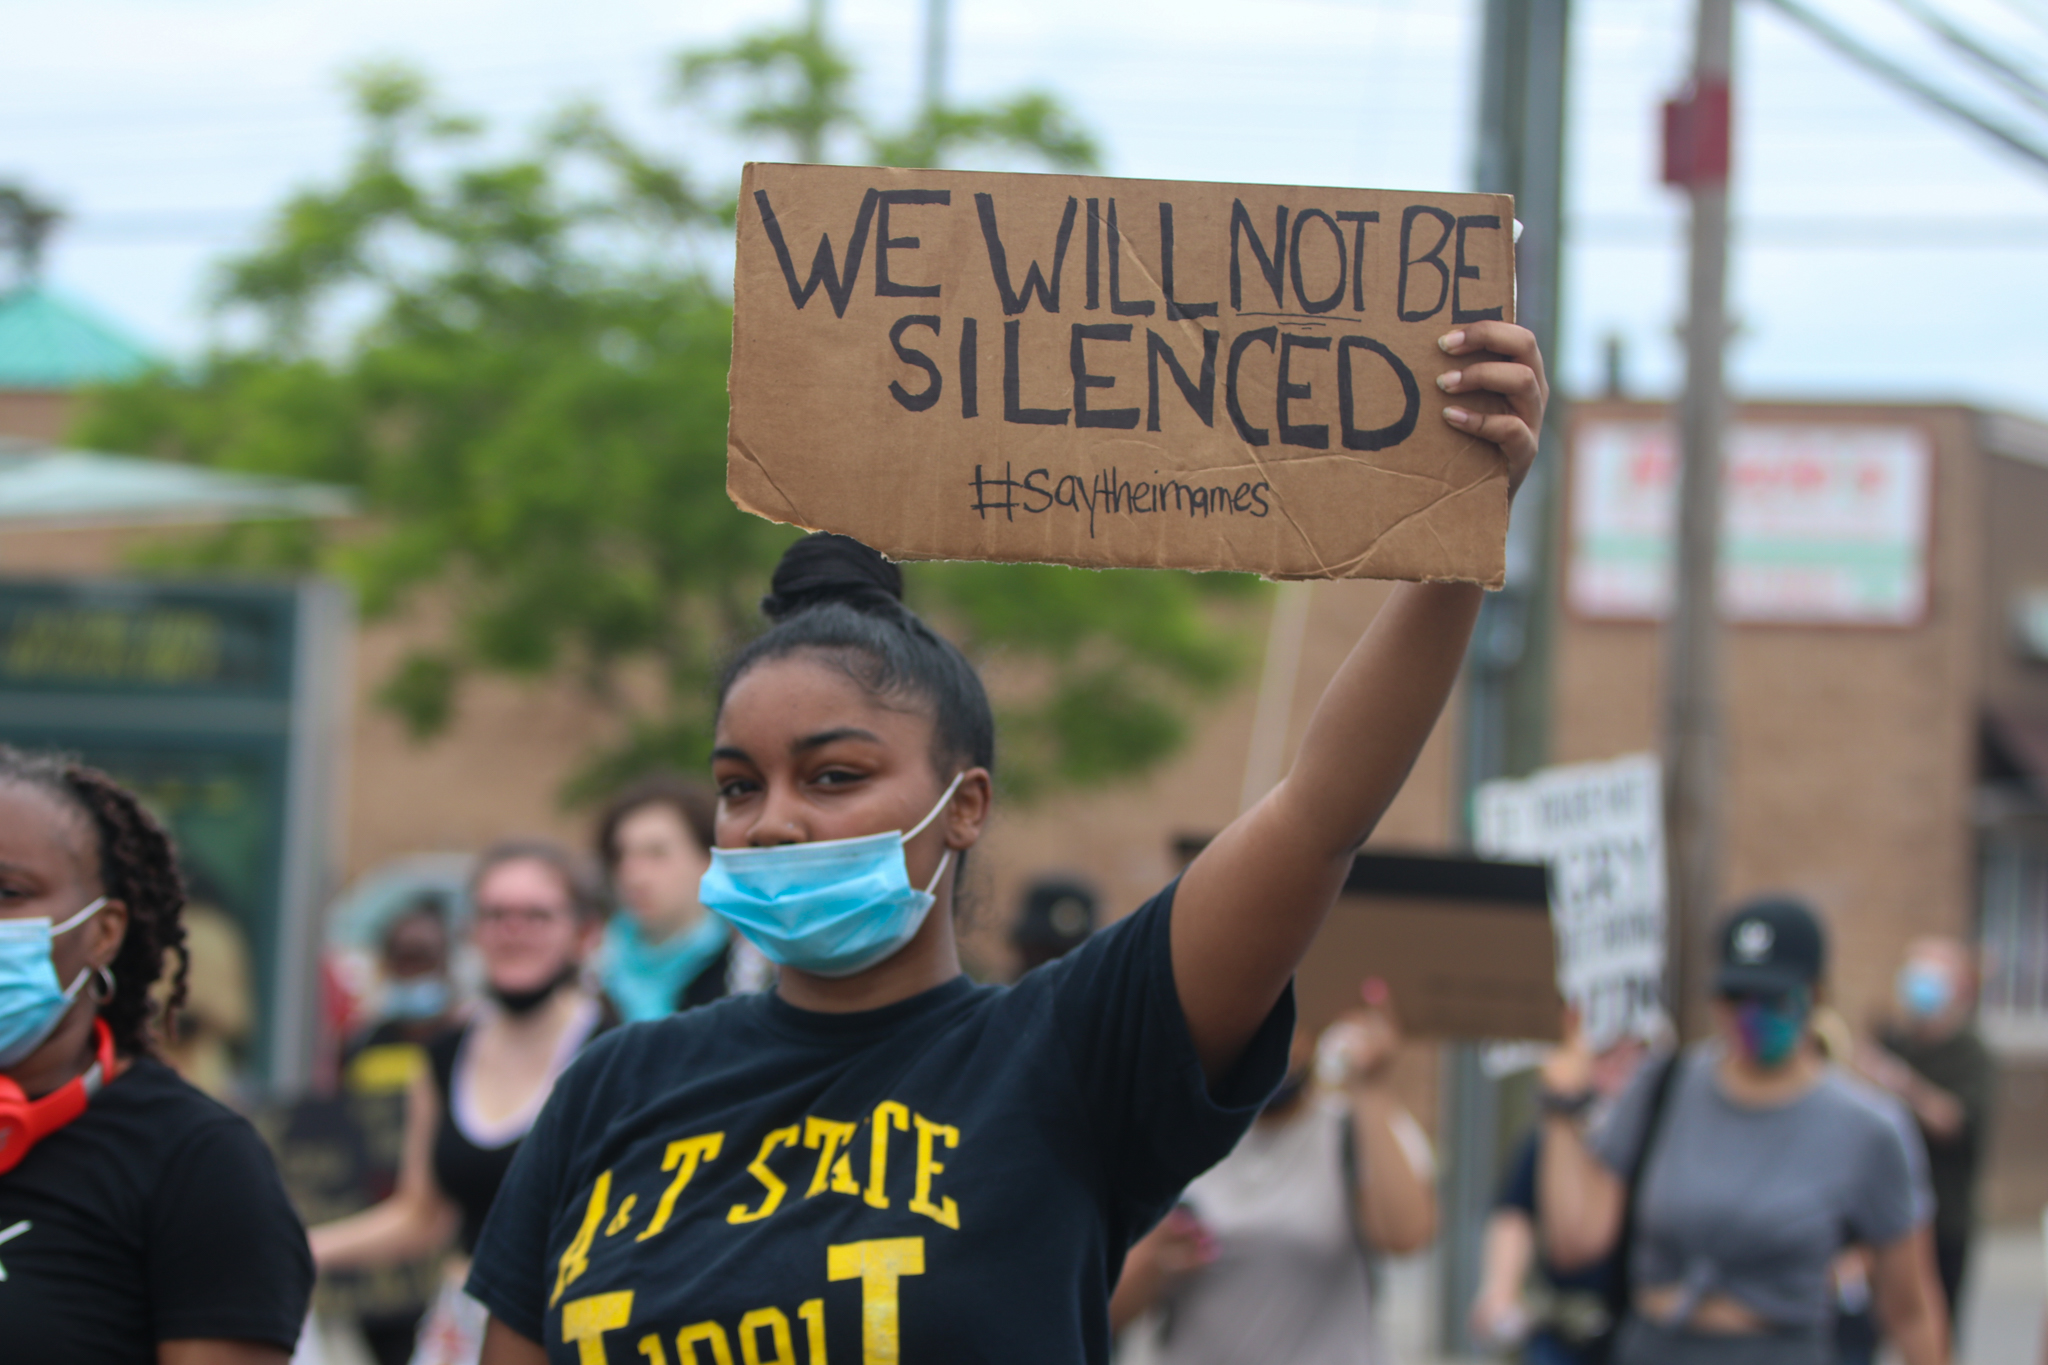 More than 400 protesters marched on Hylan Blvd to the 122nd Precinct station house in New Dorp to protest police brutality on Friday, June 5, 2020. (Staten Island Advance/Alexandra Salmieri)